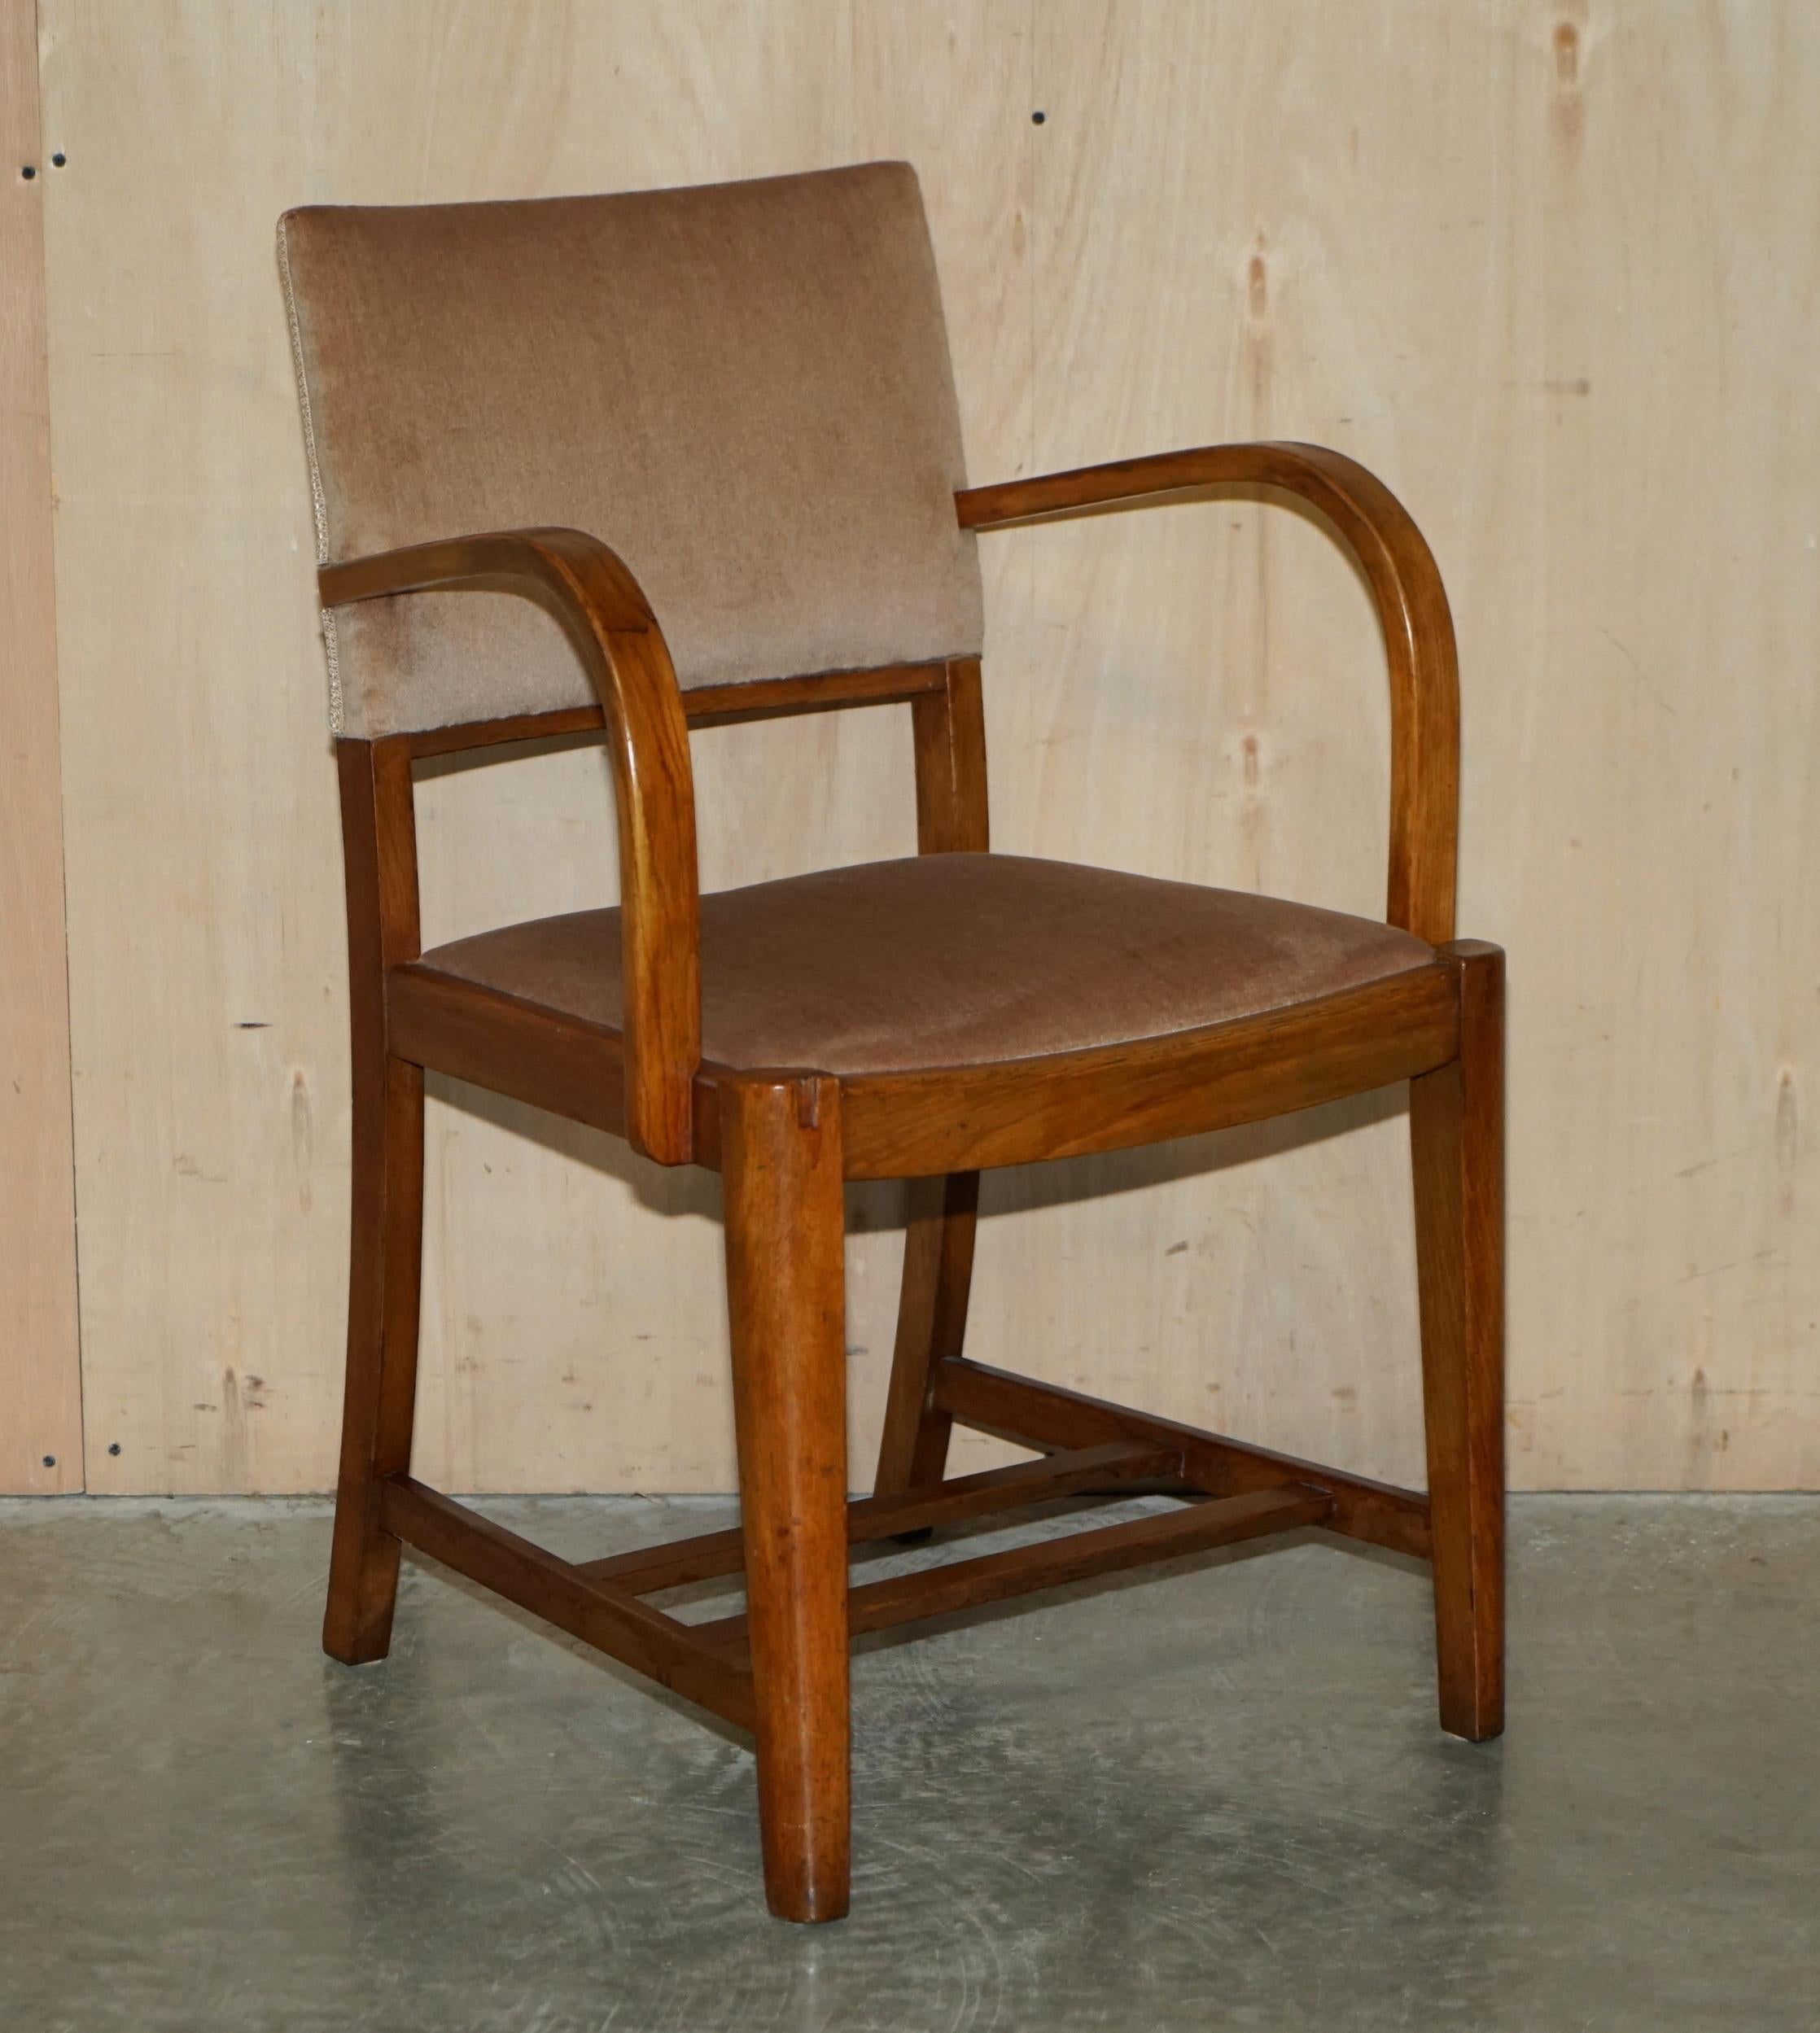 Art Deco Four Dining Chairs from Rms Queen Mary ii Cunard White Star Liner Cruise Ship For Sale